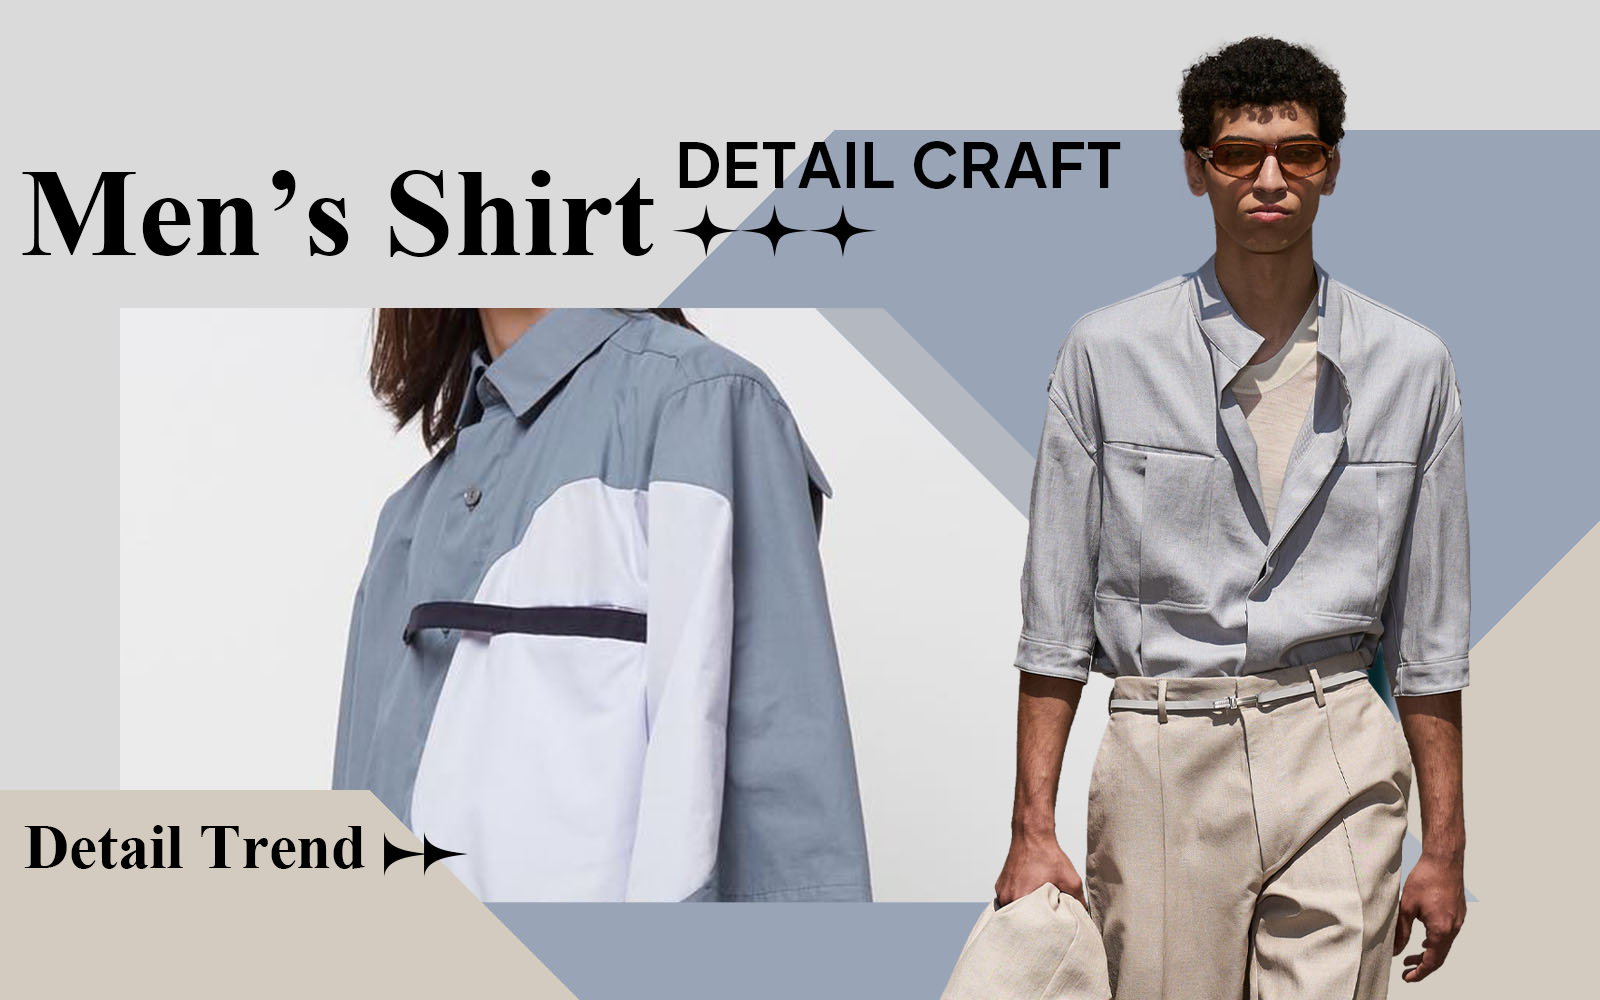 The Detail & Craft Trend for Men's Shirt